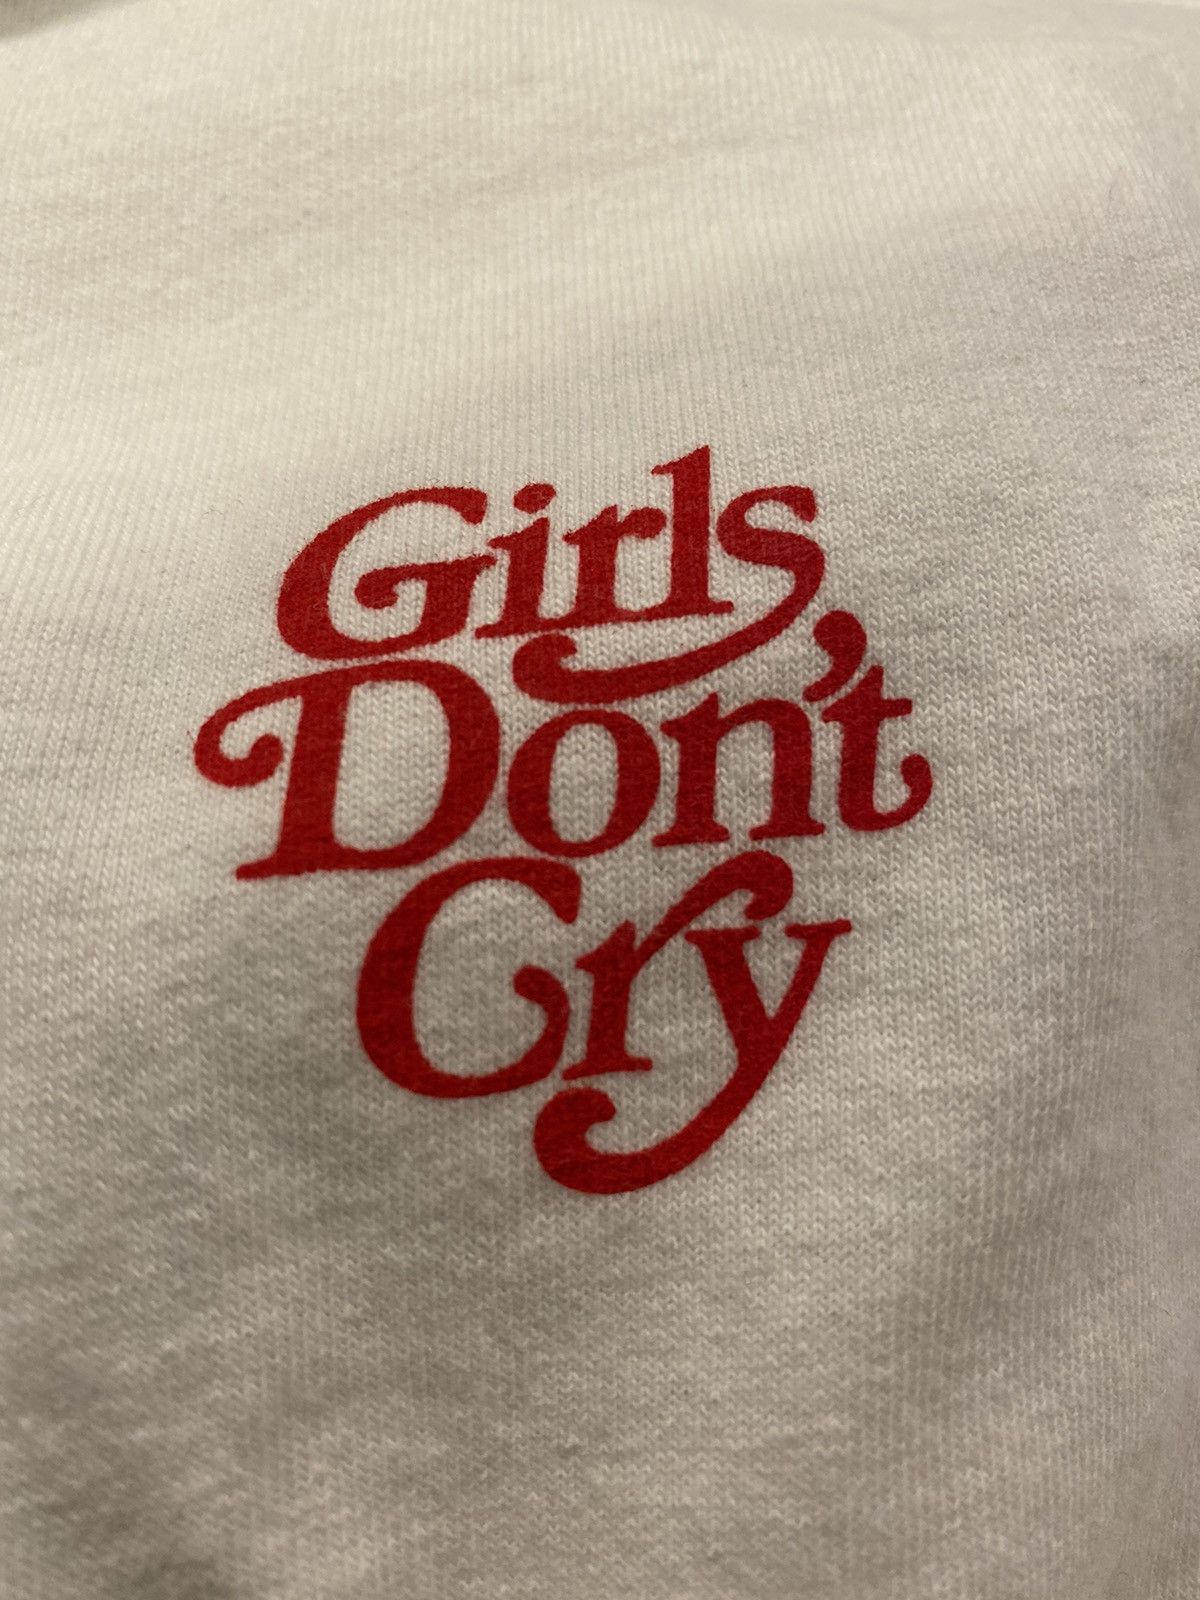 Girls Dont Cry Girls Don't Cry x Cherry LA Verdy Day Japan